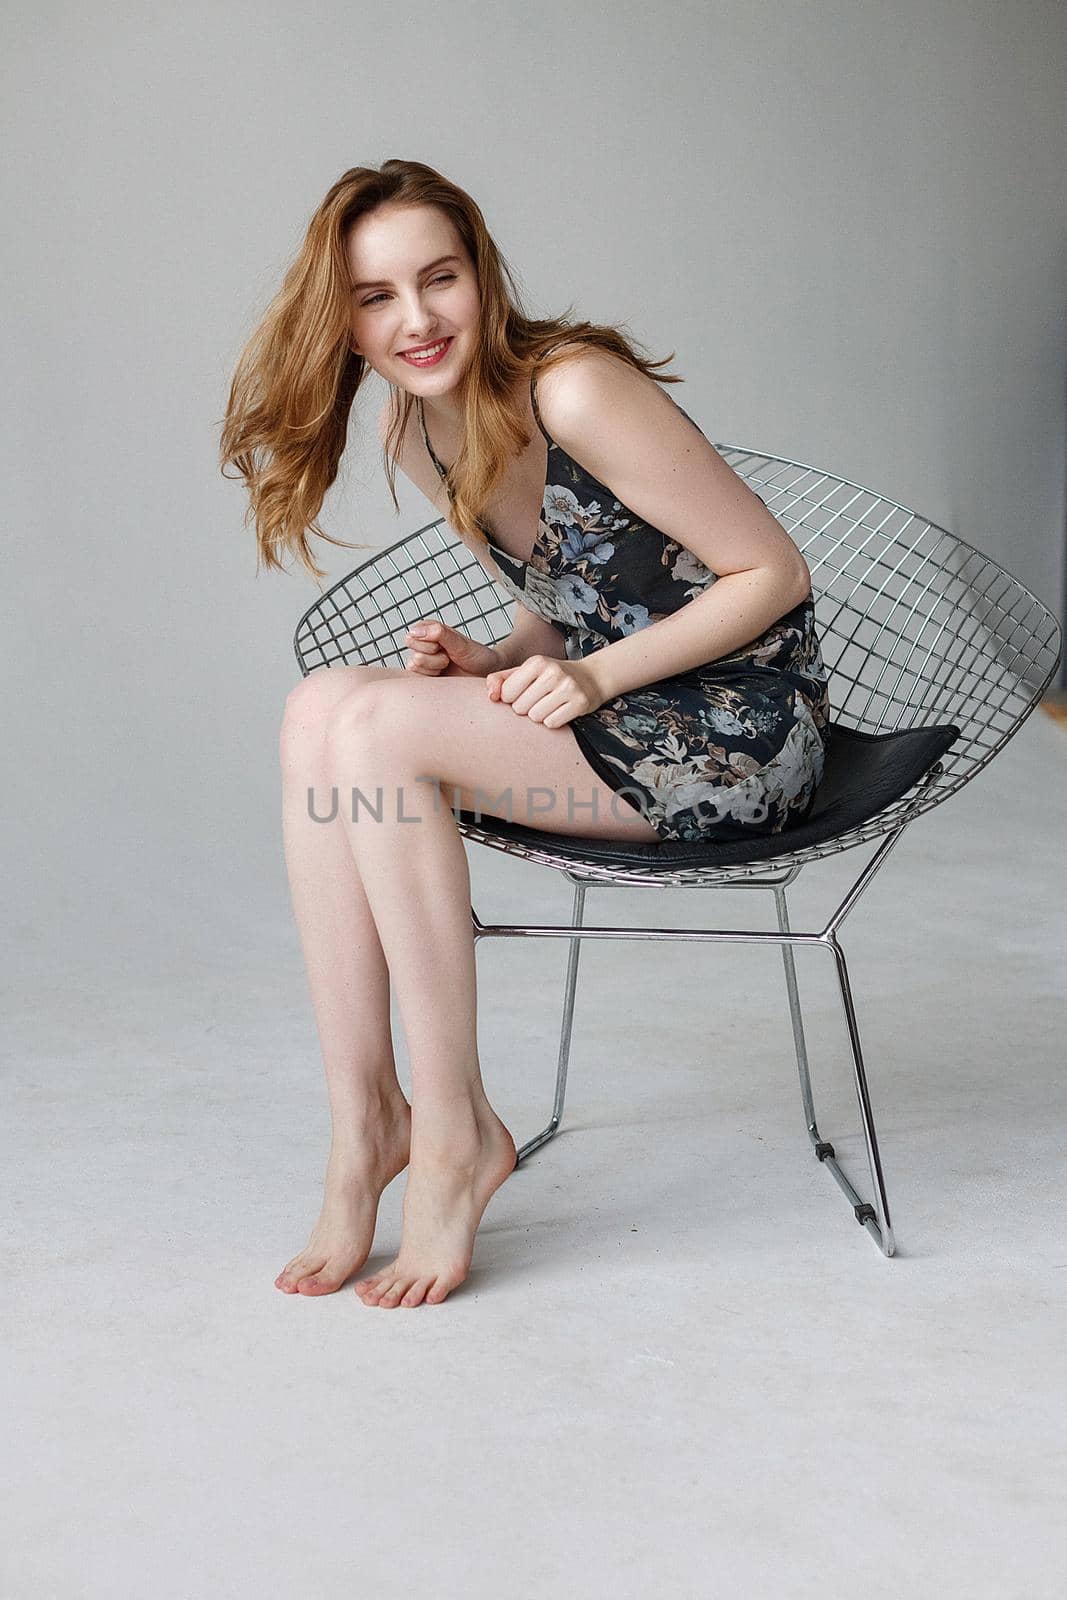 Beautiful young woman in motley dress, indoors portrait of cute smiling model. caucasian skinny female with long brown hair sitting in chair on white background. natural pretty lady posing at home